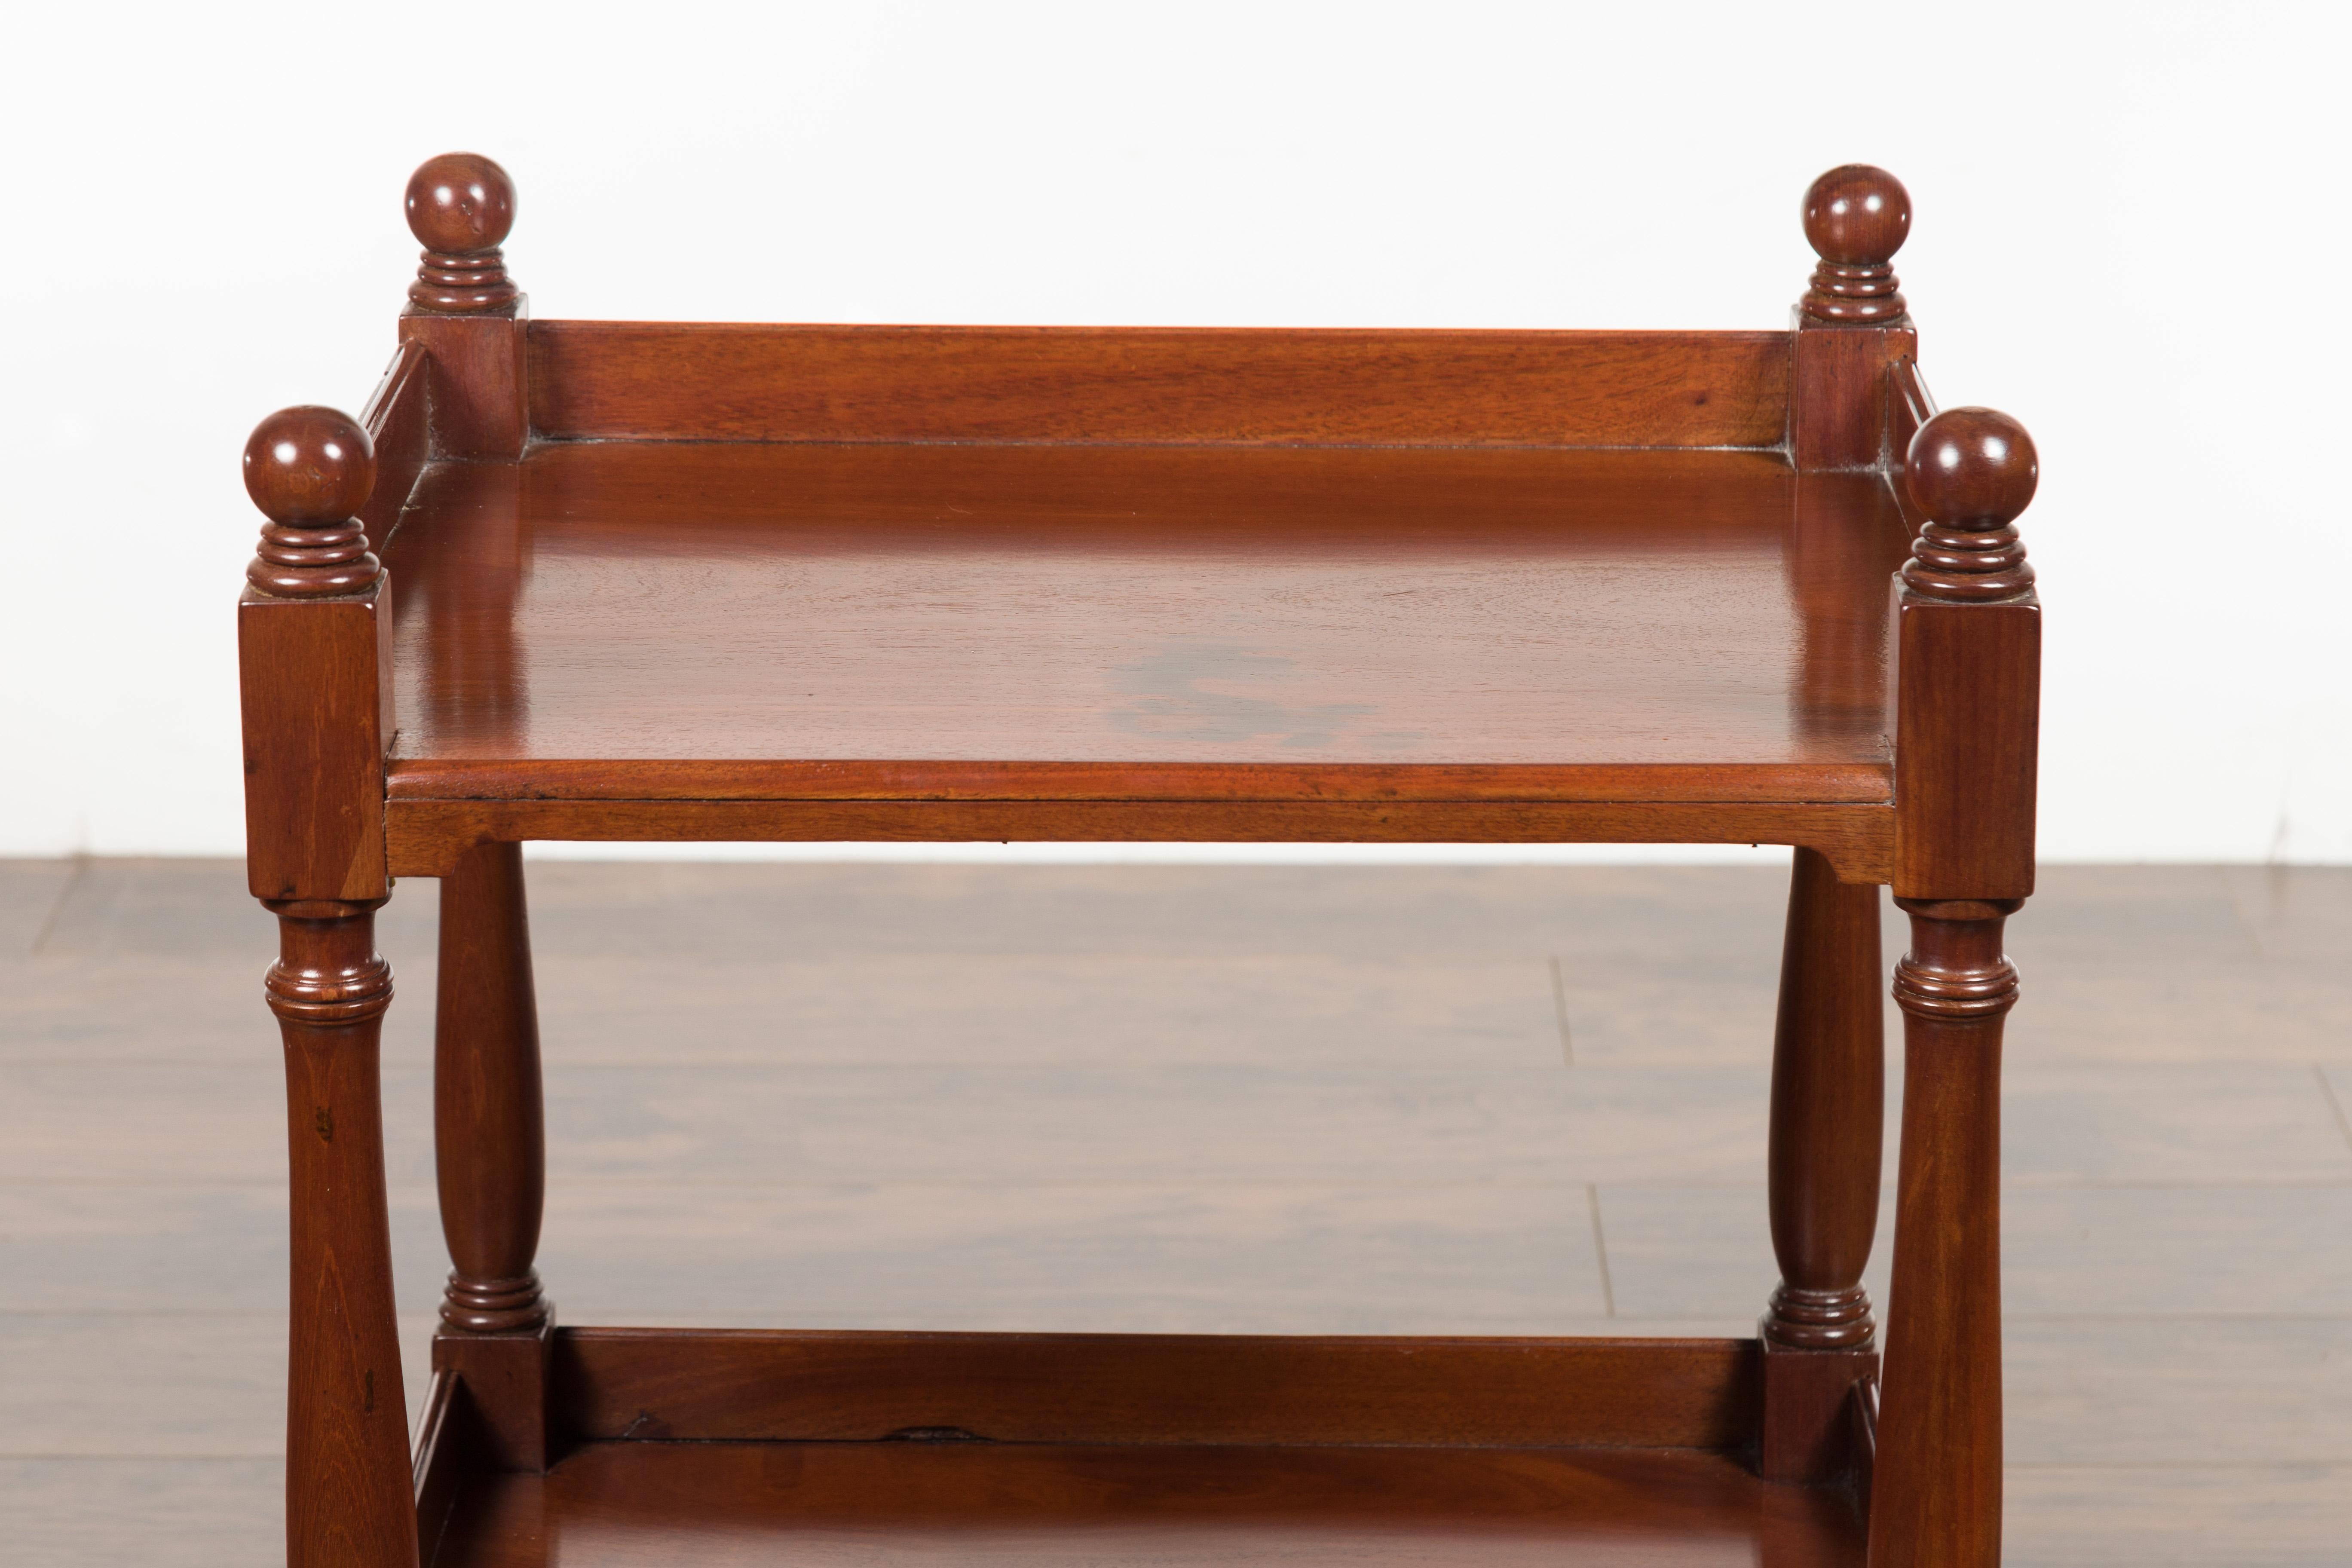 19th Century English 1870s Mahogany Tiered Table with Turned Legs and Low Shelf and Finials